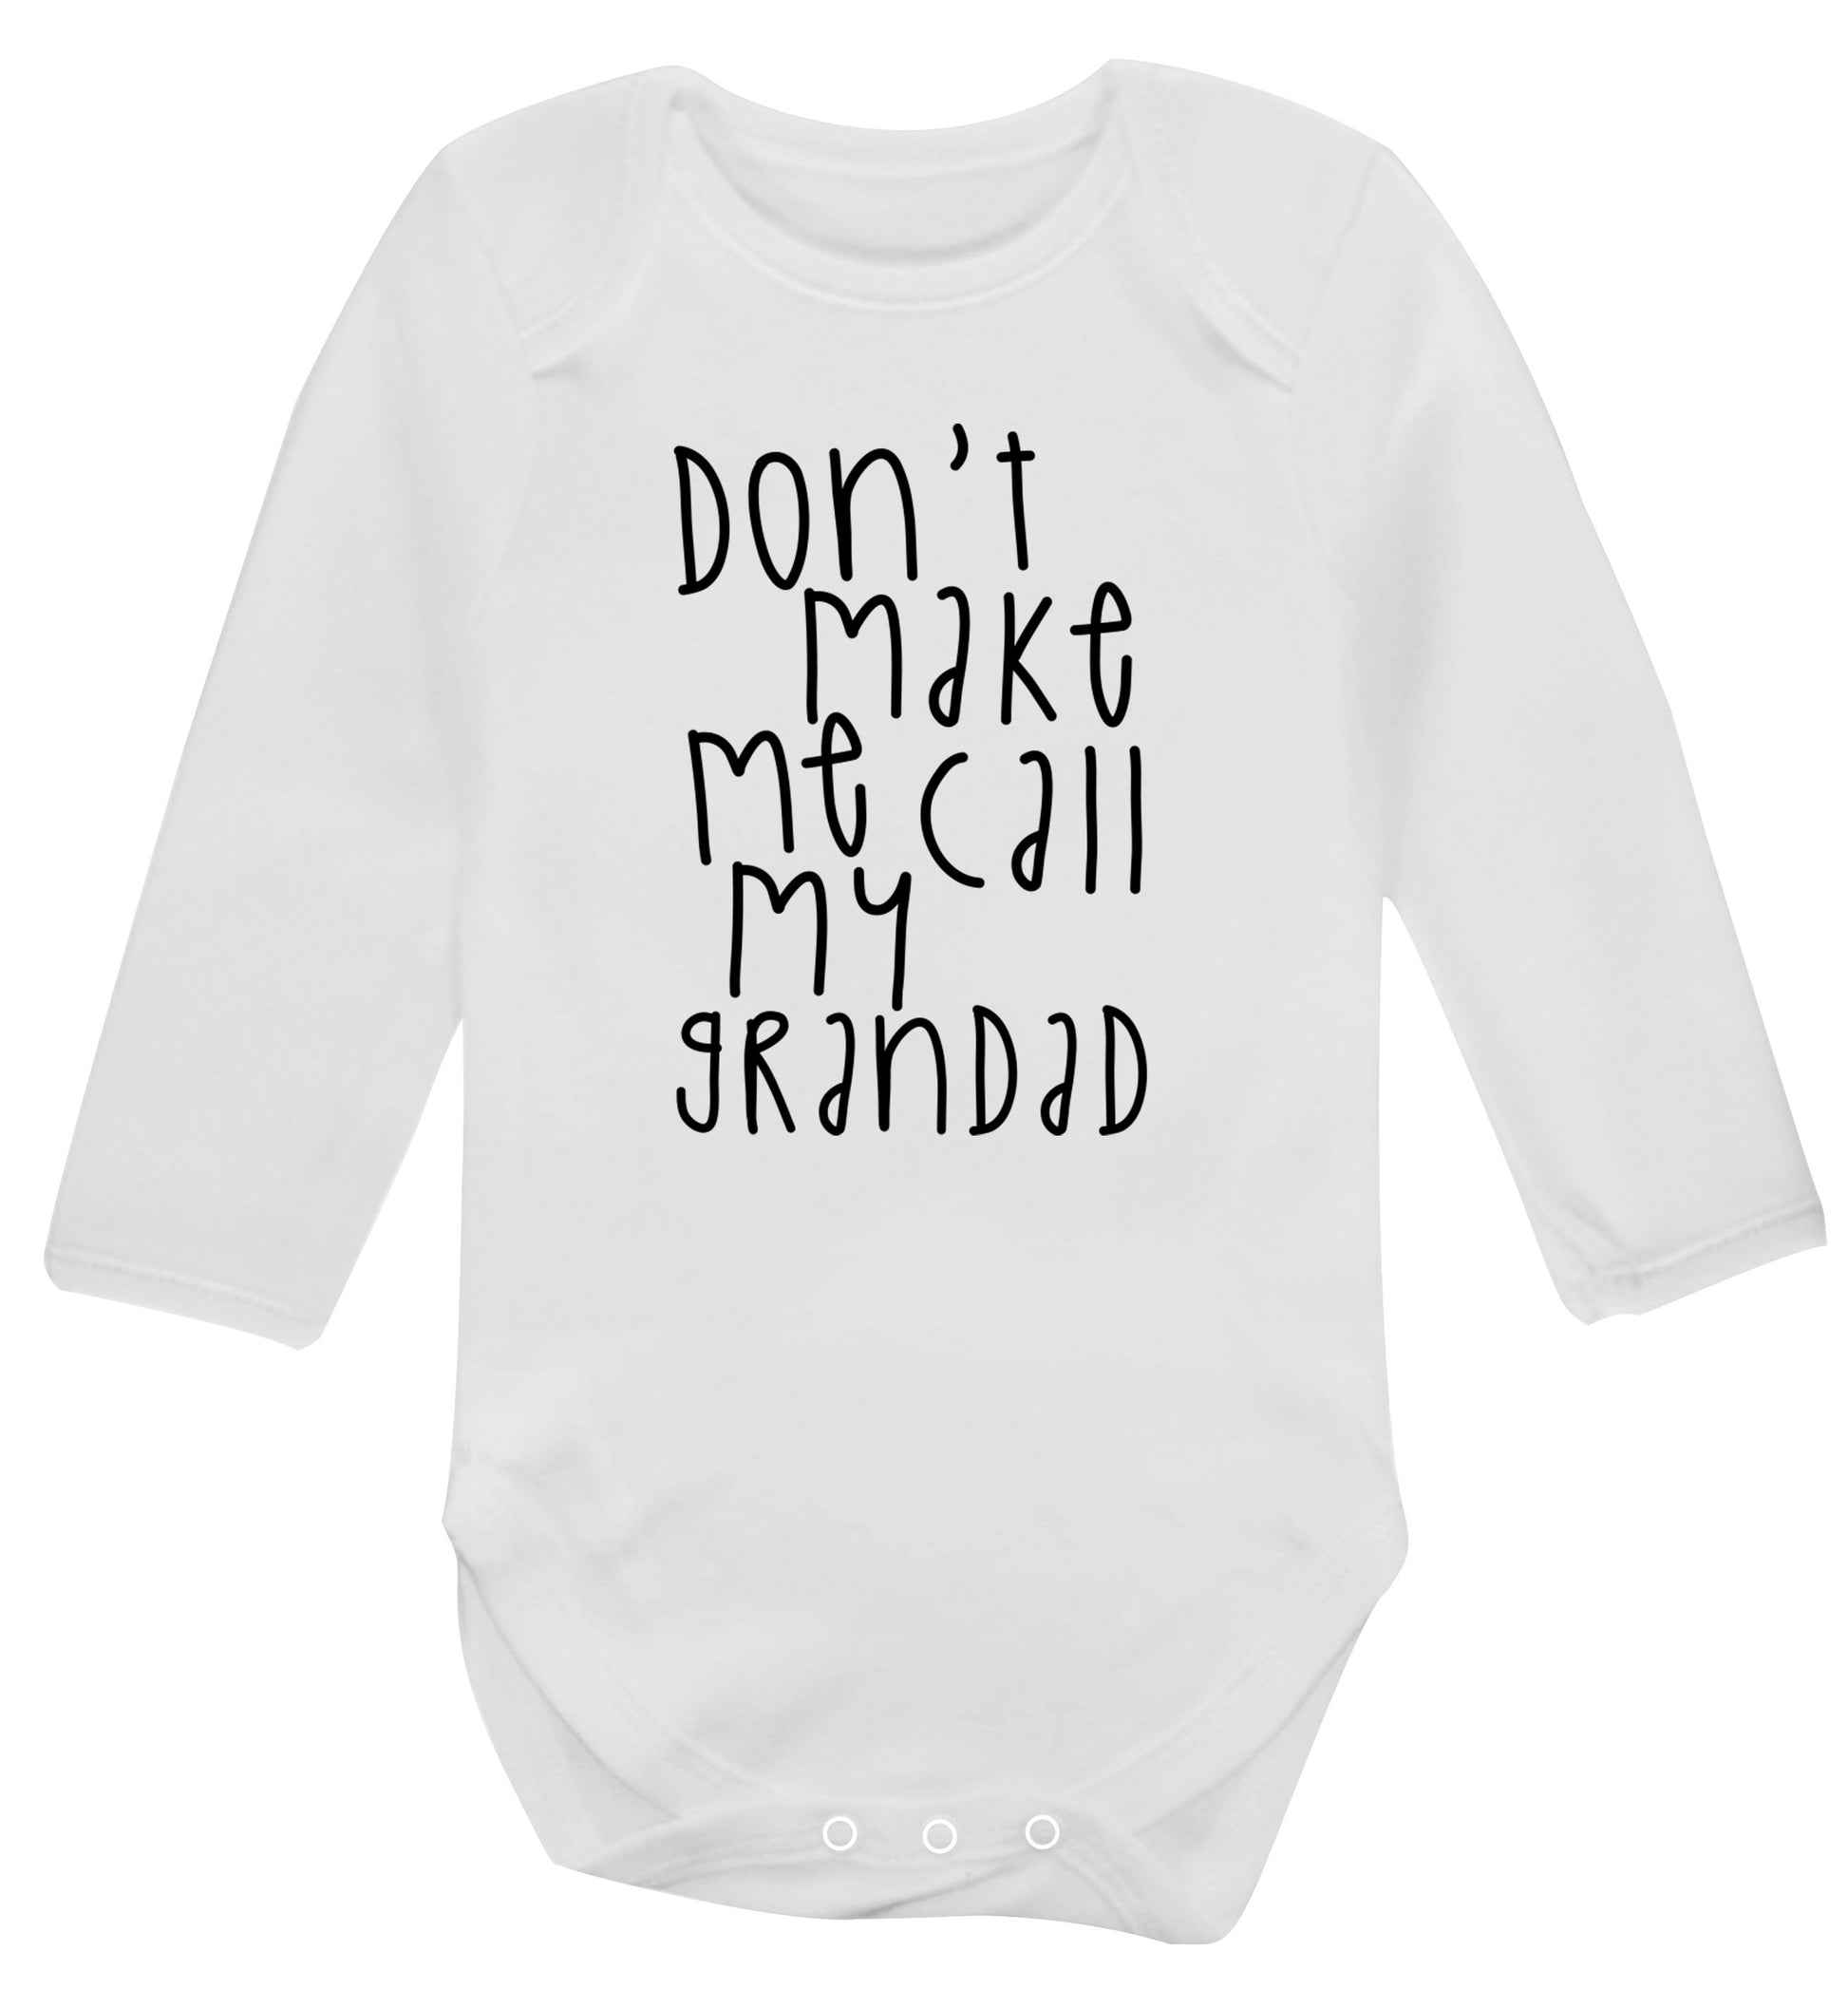 Don't make me call my grandad Baby Vest long sleeved white 6-12 months